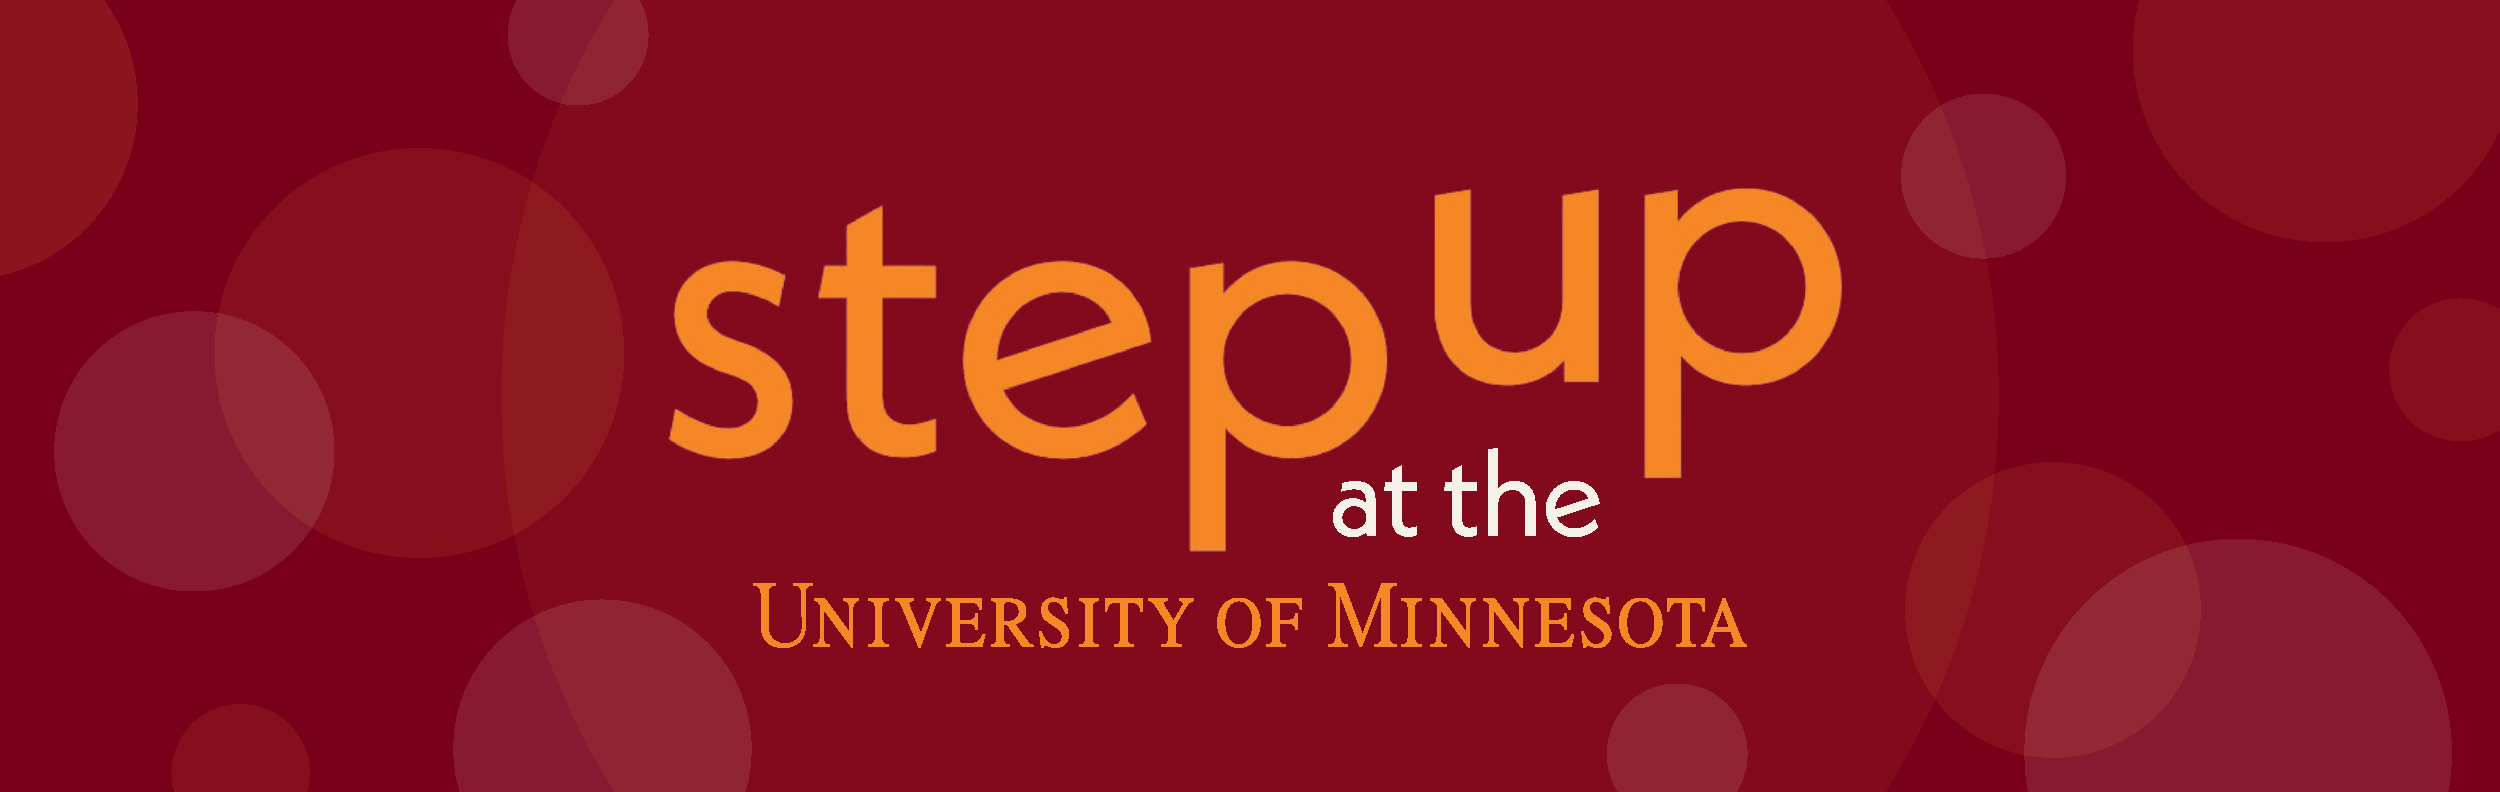 Step Up at the University of Minnesota